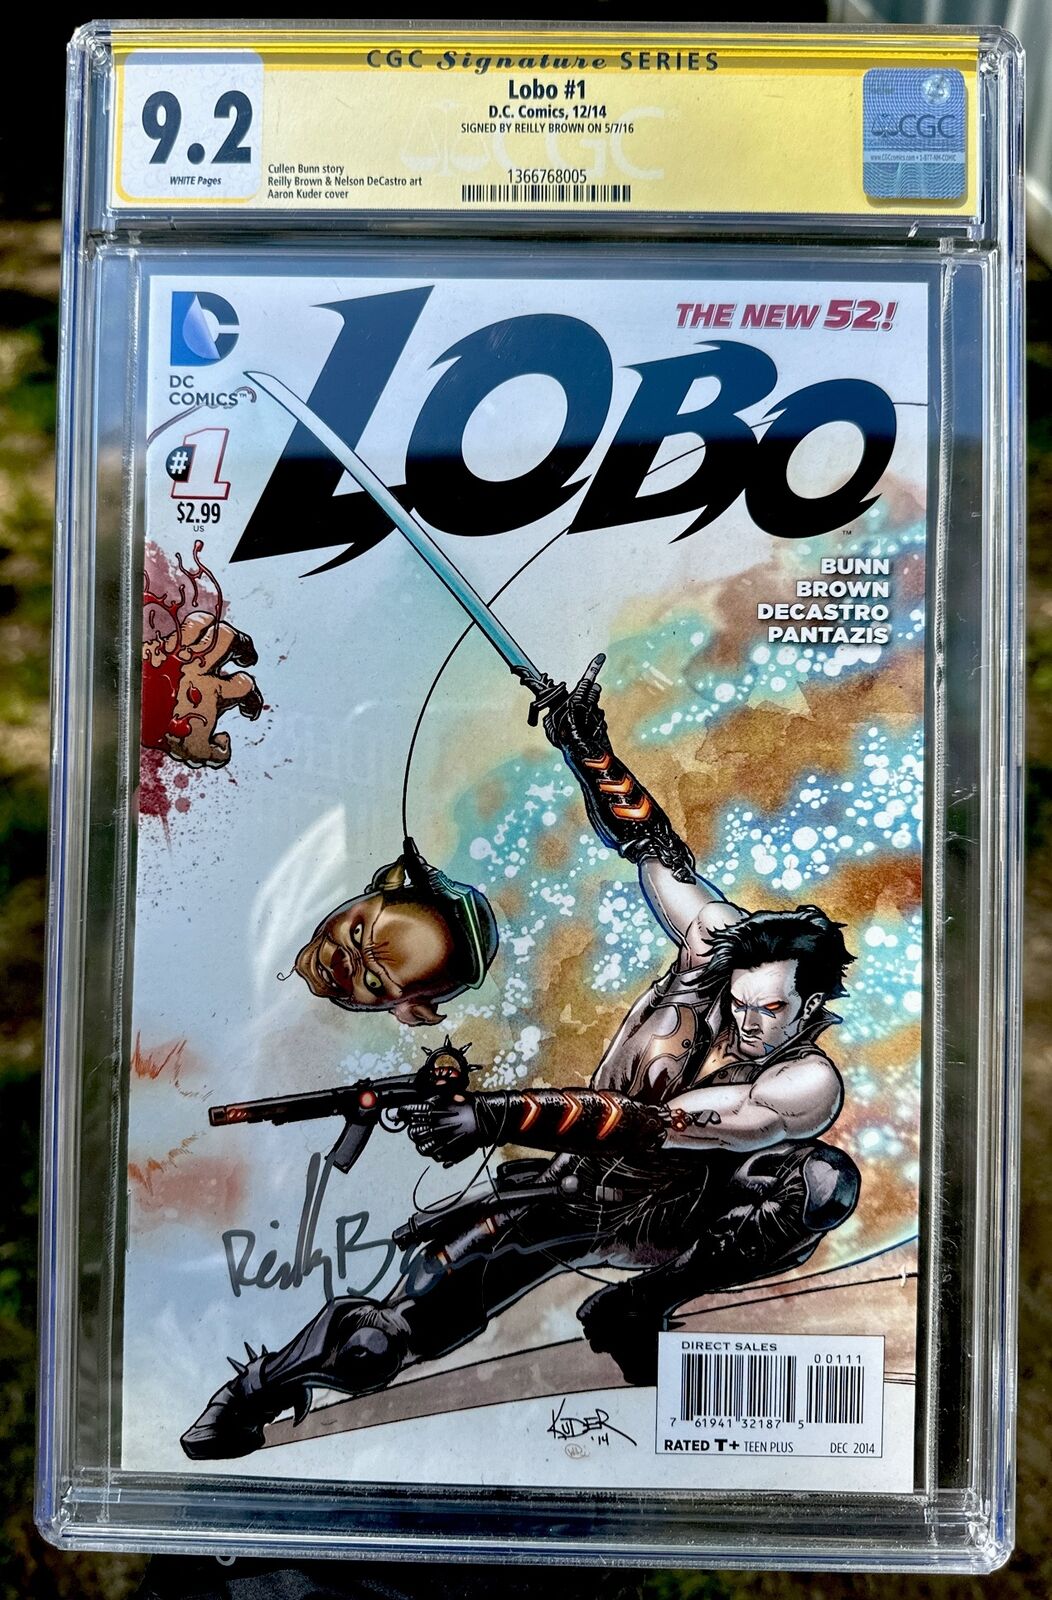 CGC 9.2 Lobo #1  DC Comics 2014 Signed Relly Brown